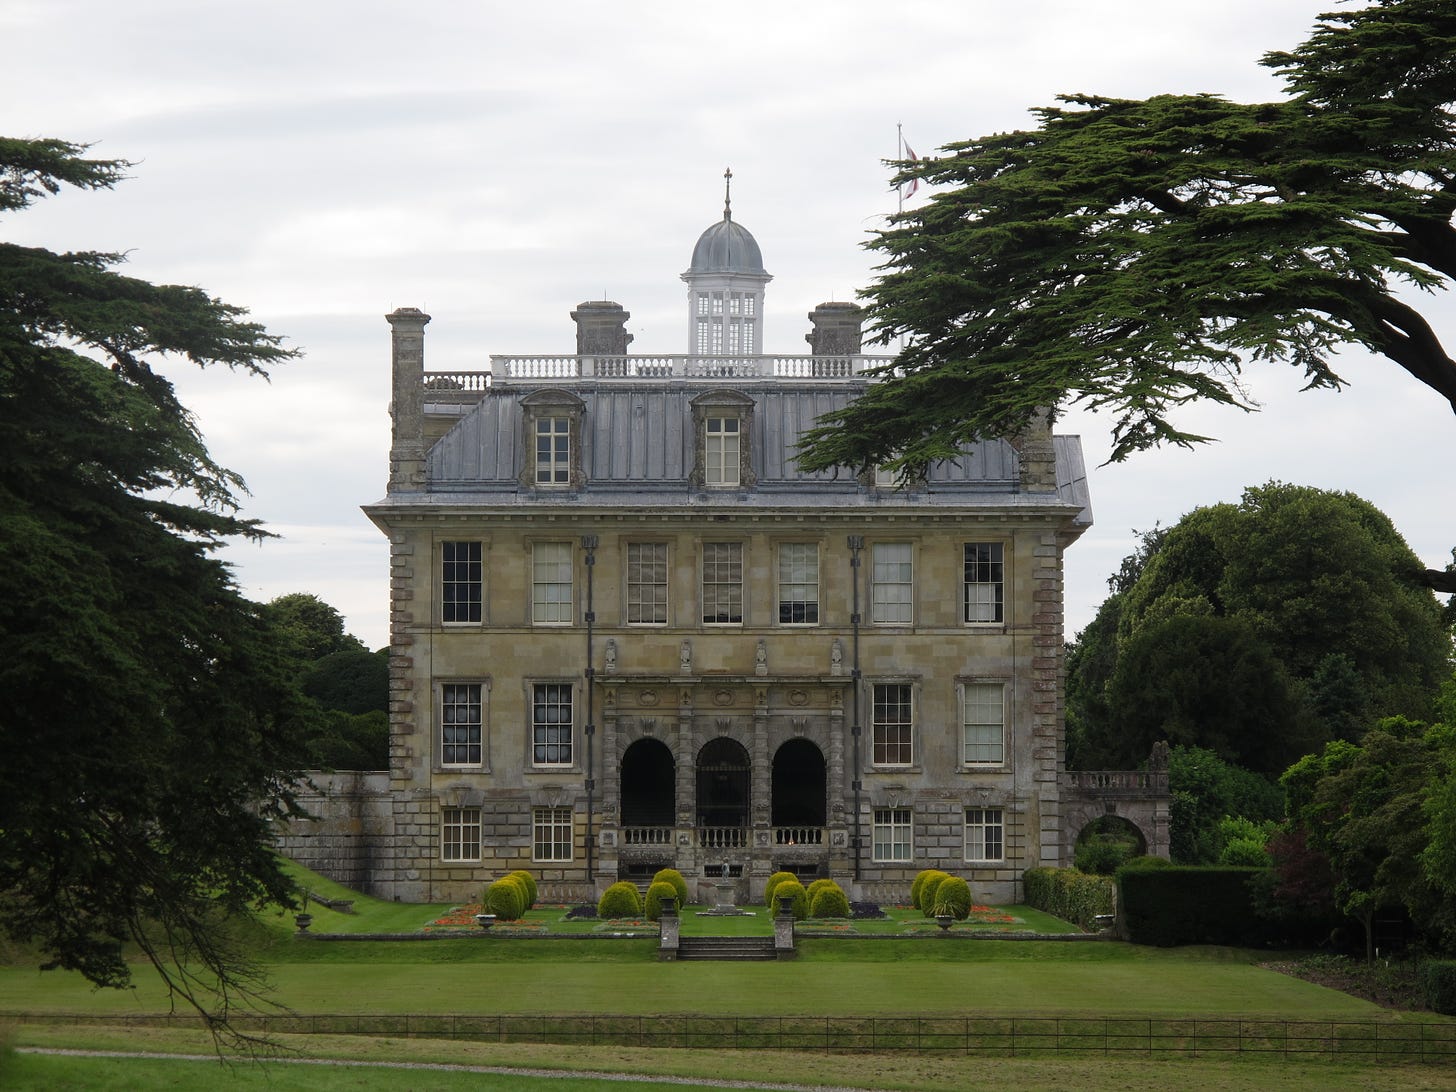 The facade of Kingston Lacy, an English country house, and its gardens.